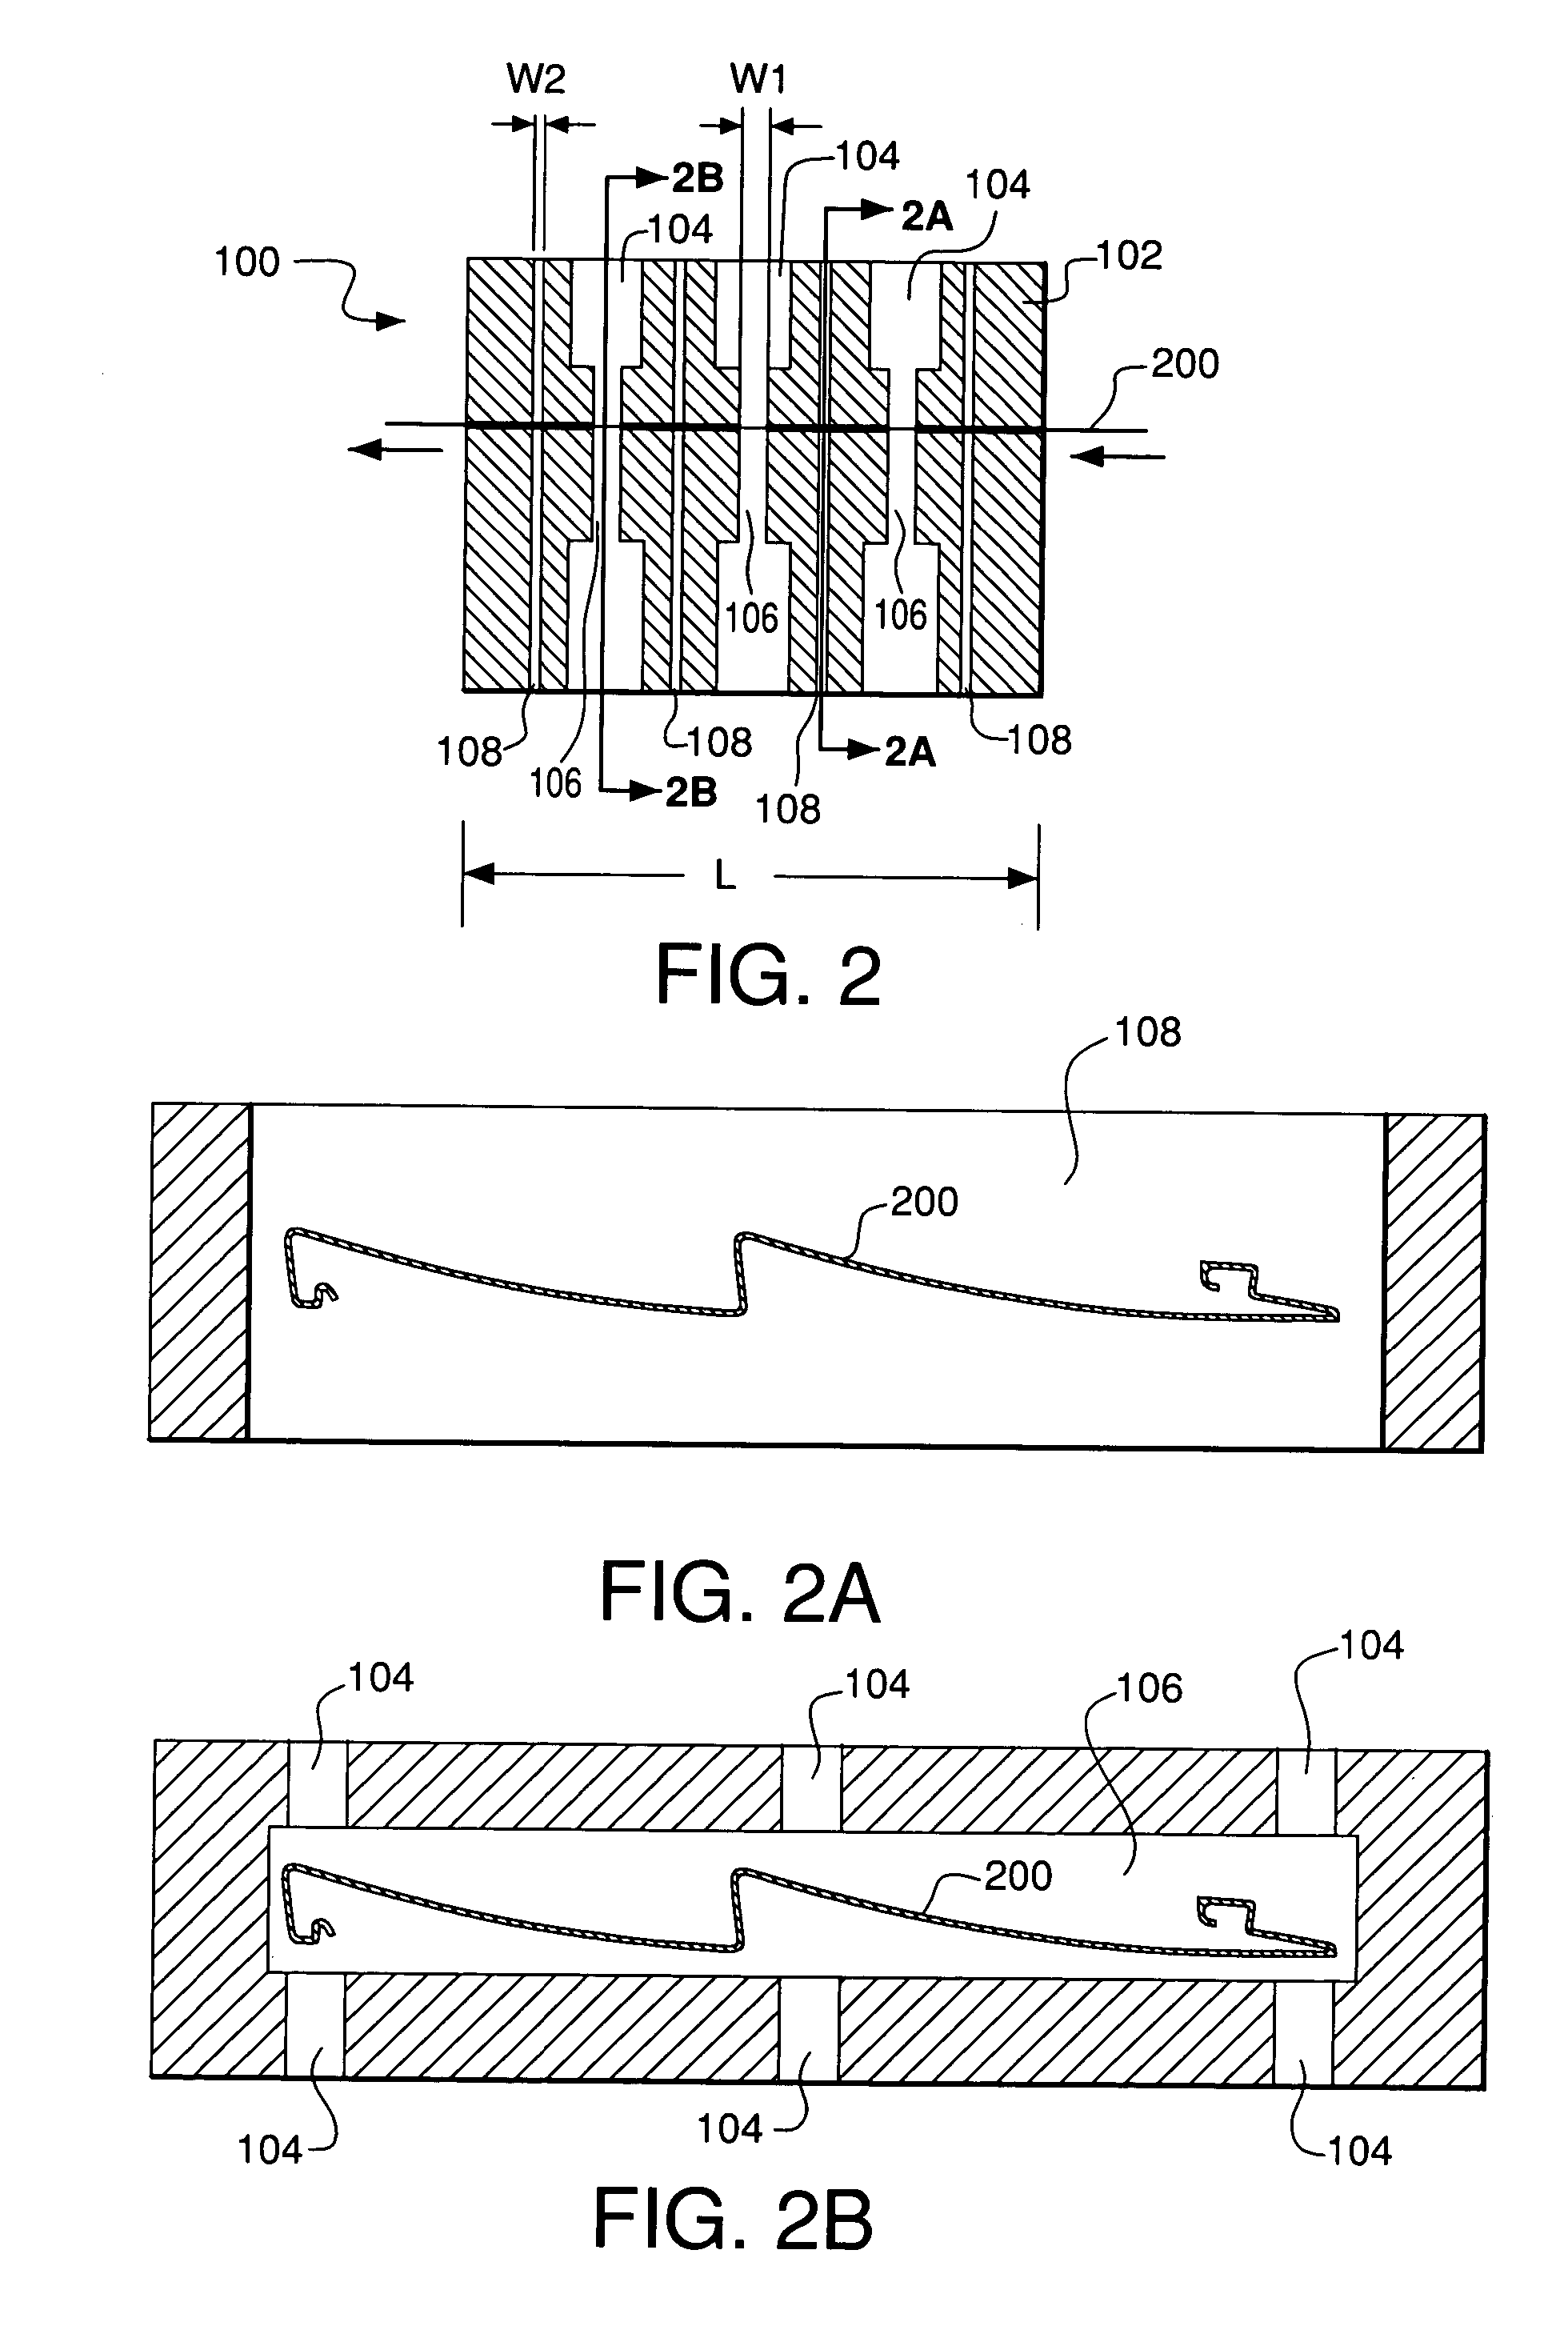 Sizer for forming shaped polymeric articles and method of sizing polymeric articles